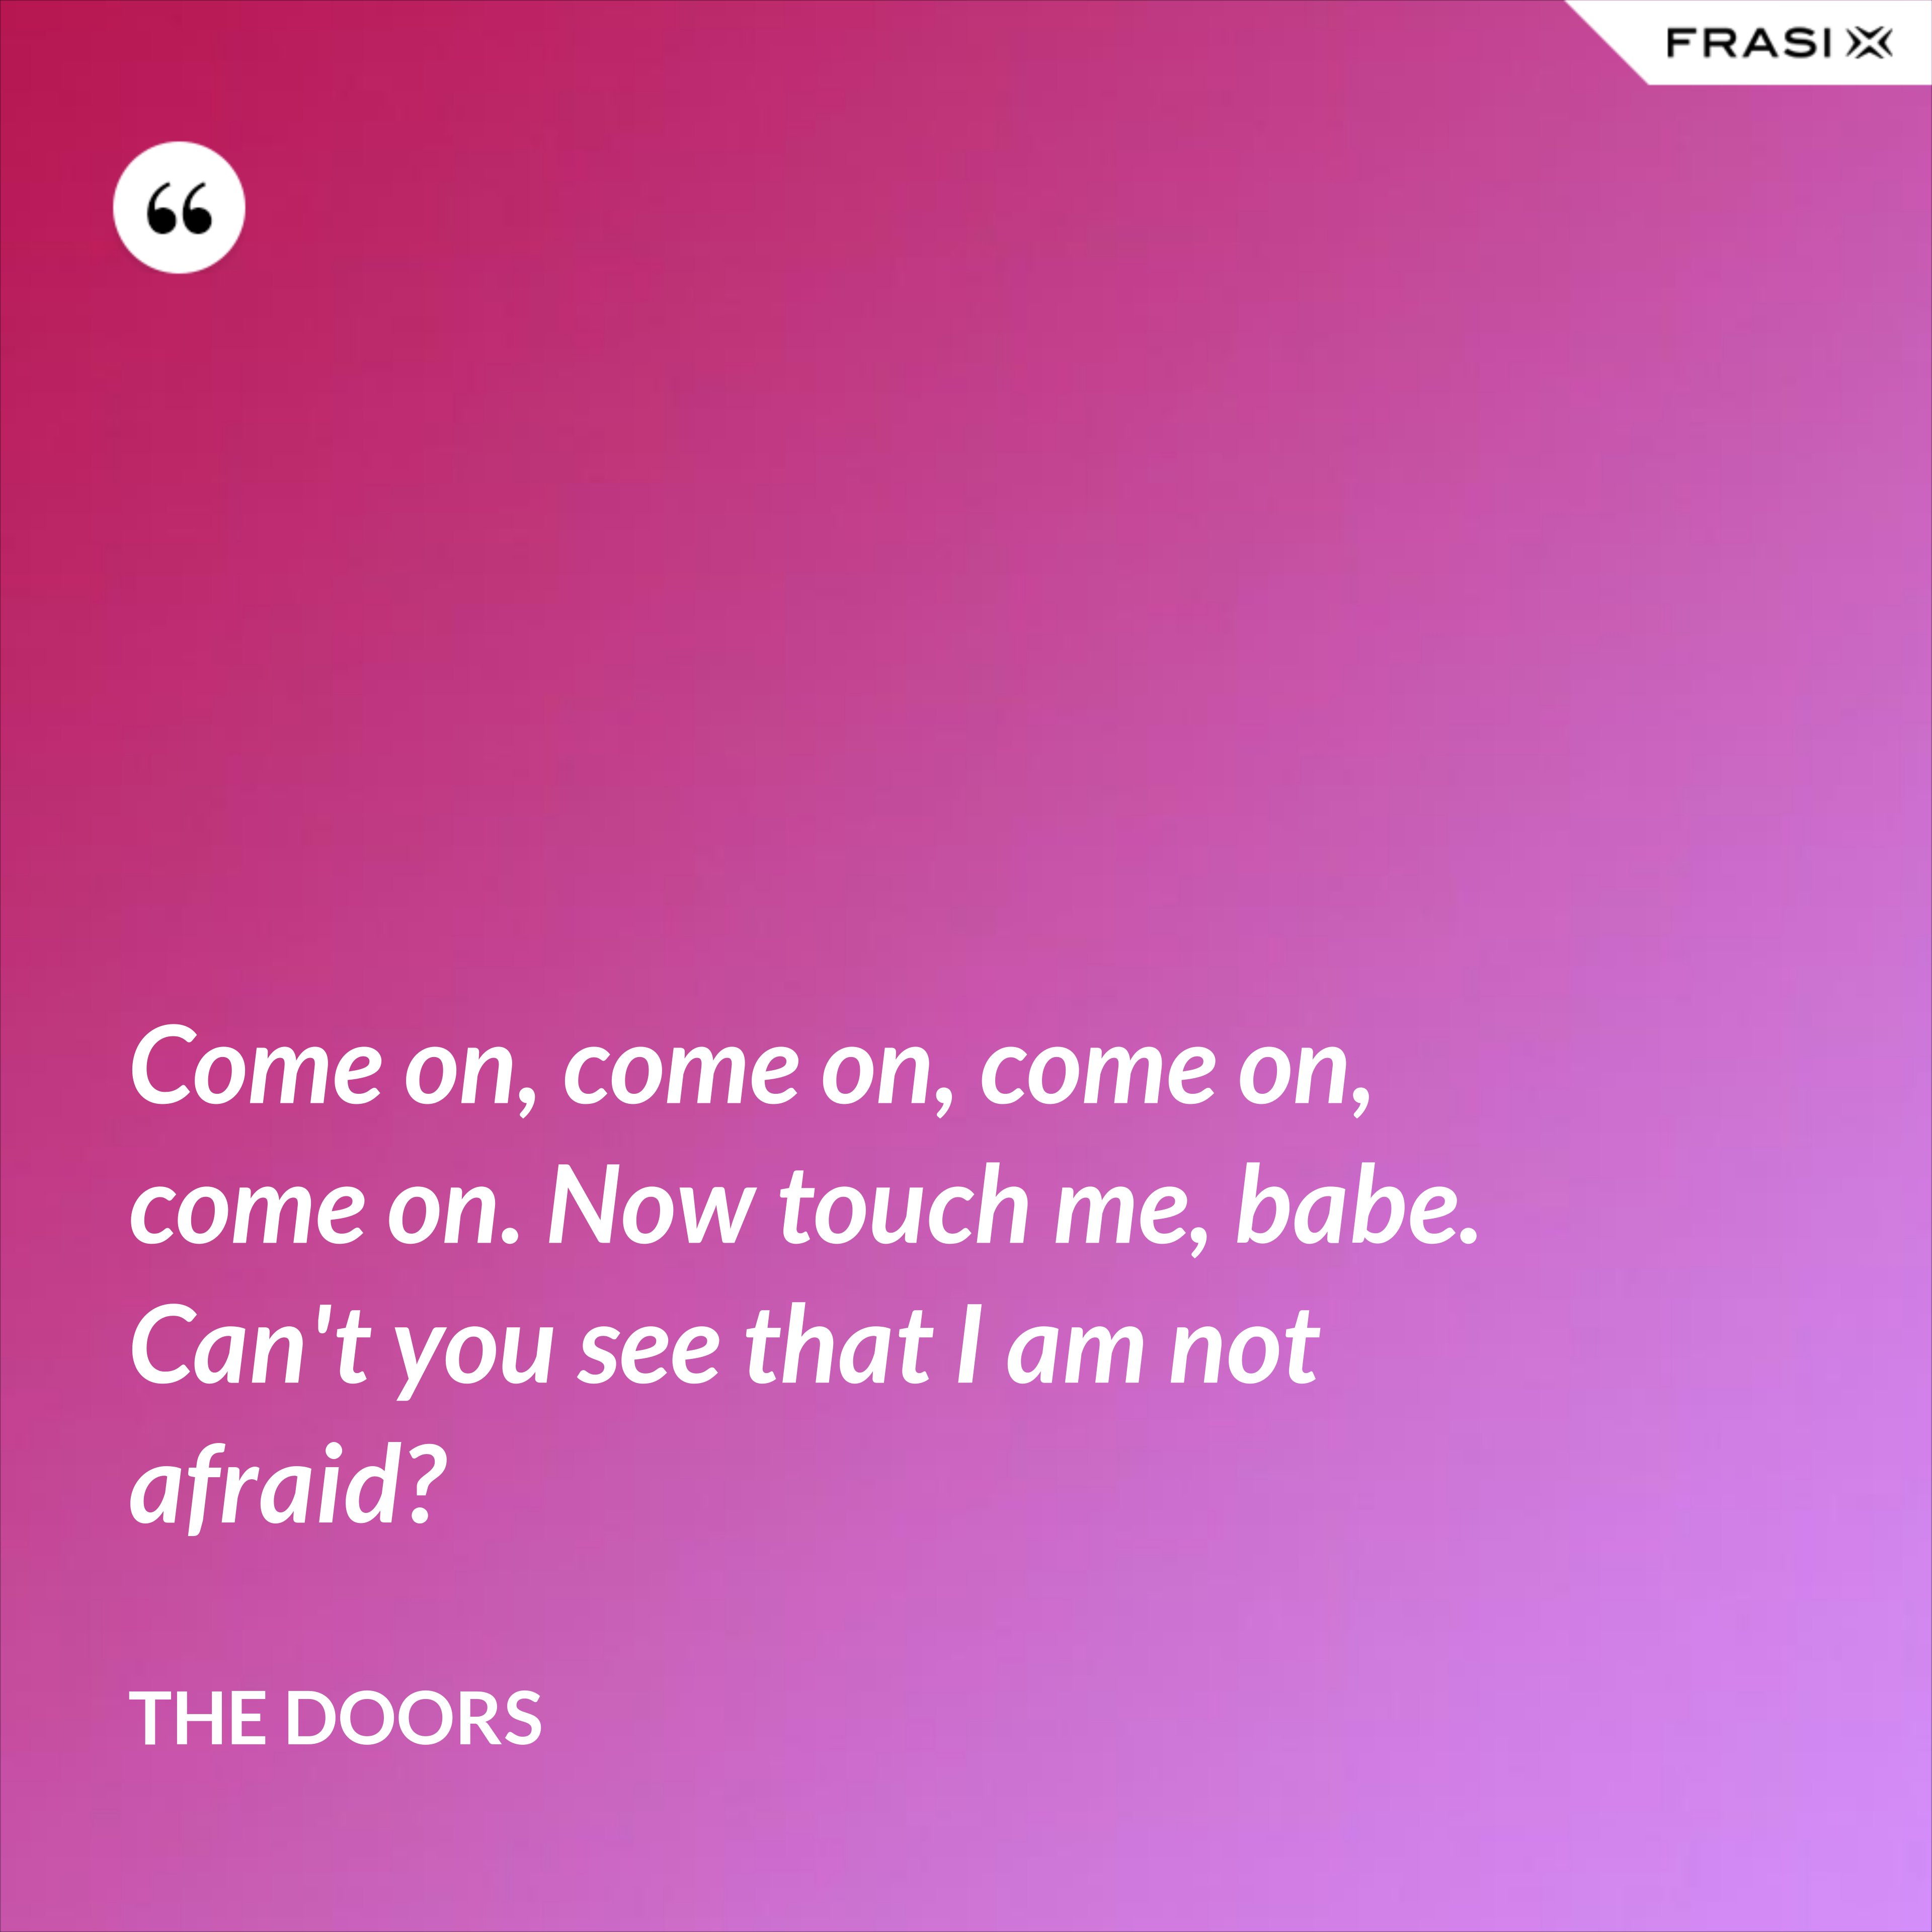 Come on, come on, come on, come on. Now touch me, babe. Can't you see that I am not afraid? - The Doors